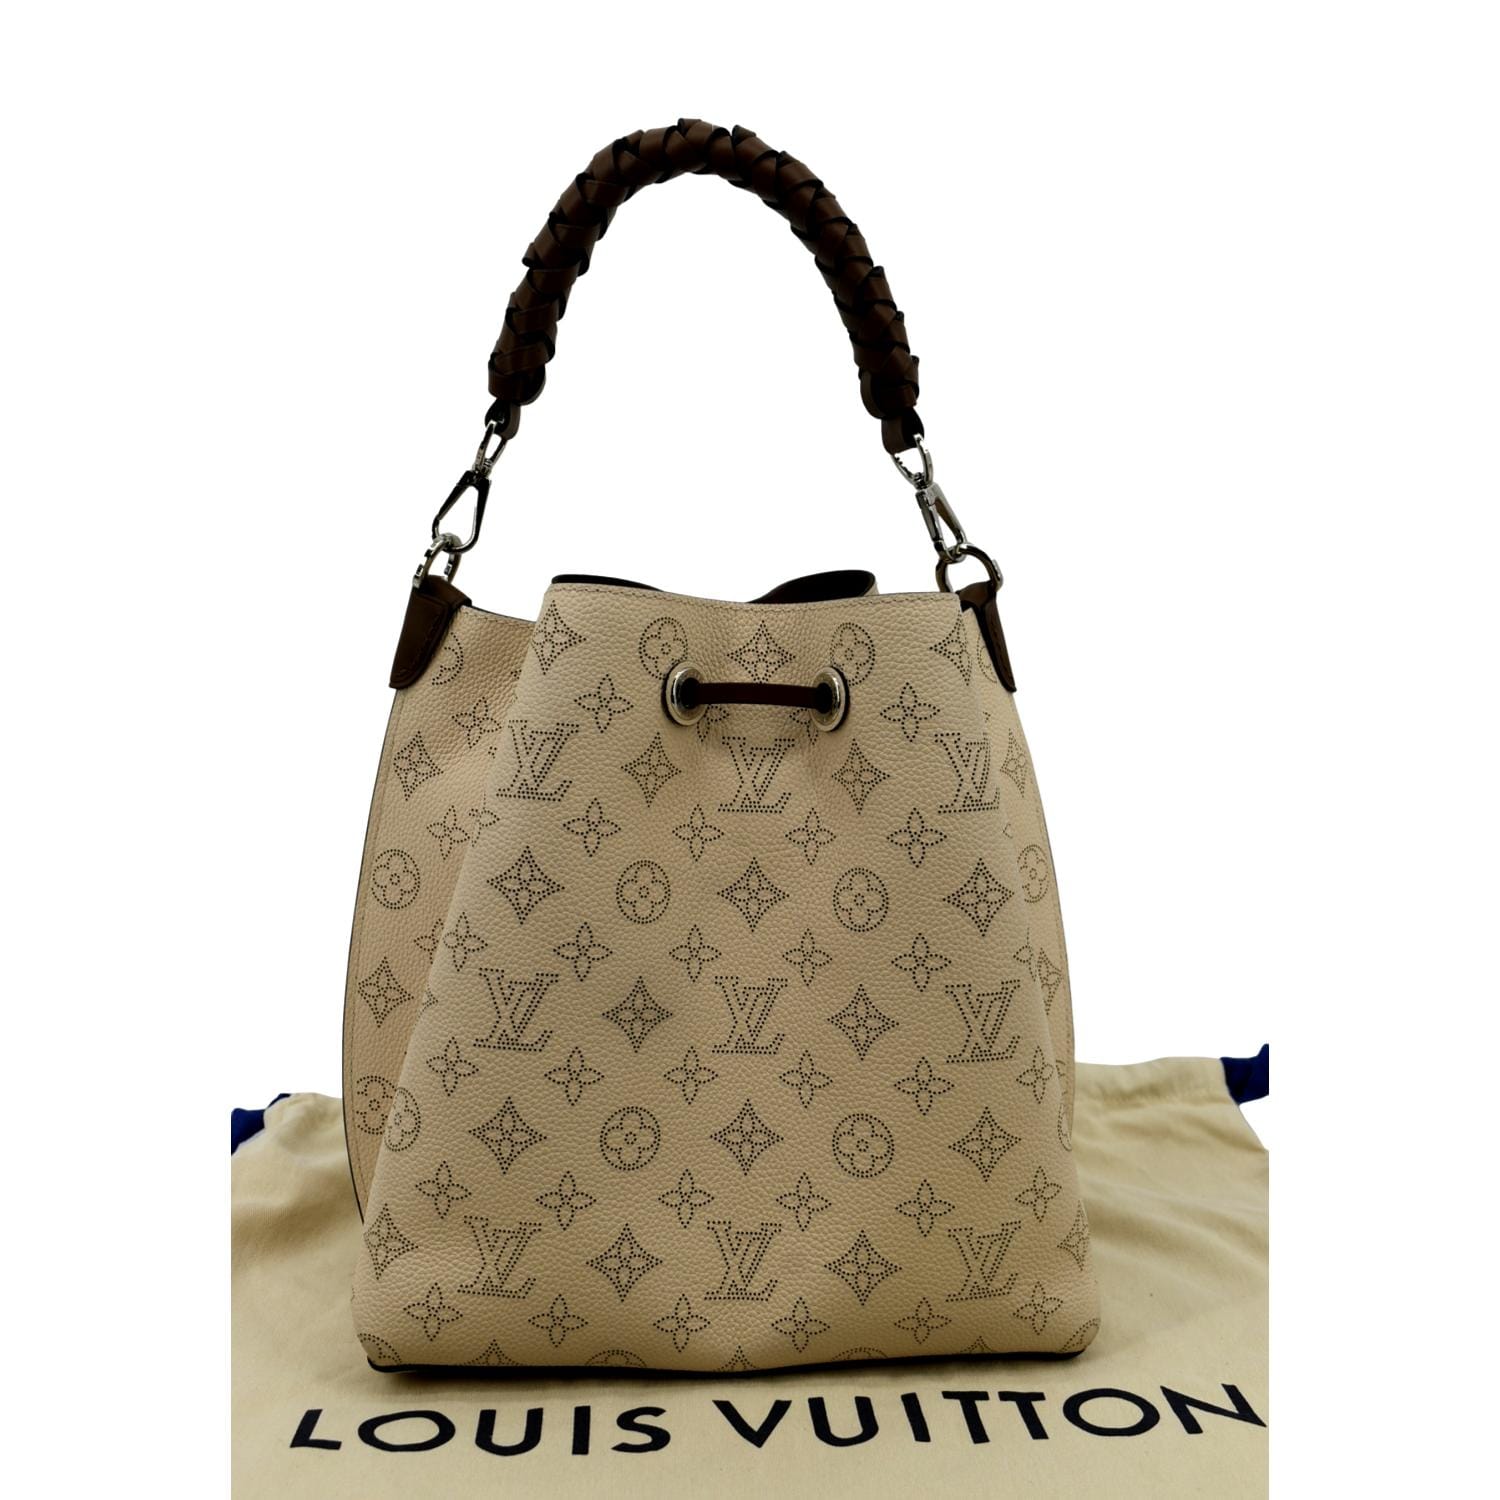 The Muria Mahina Louis Vuitton perforated leather crossbody bag is